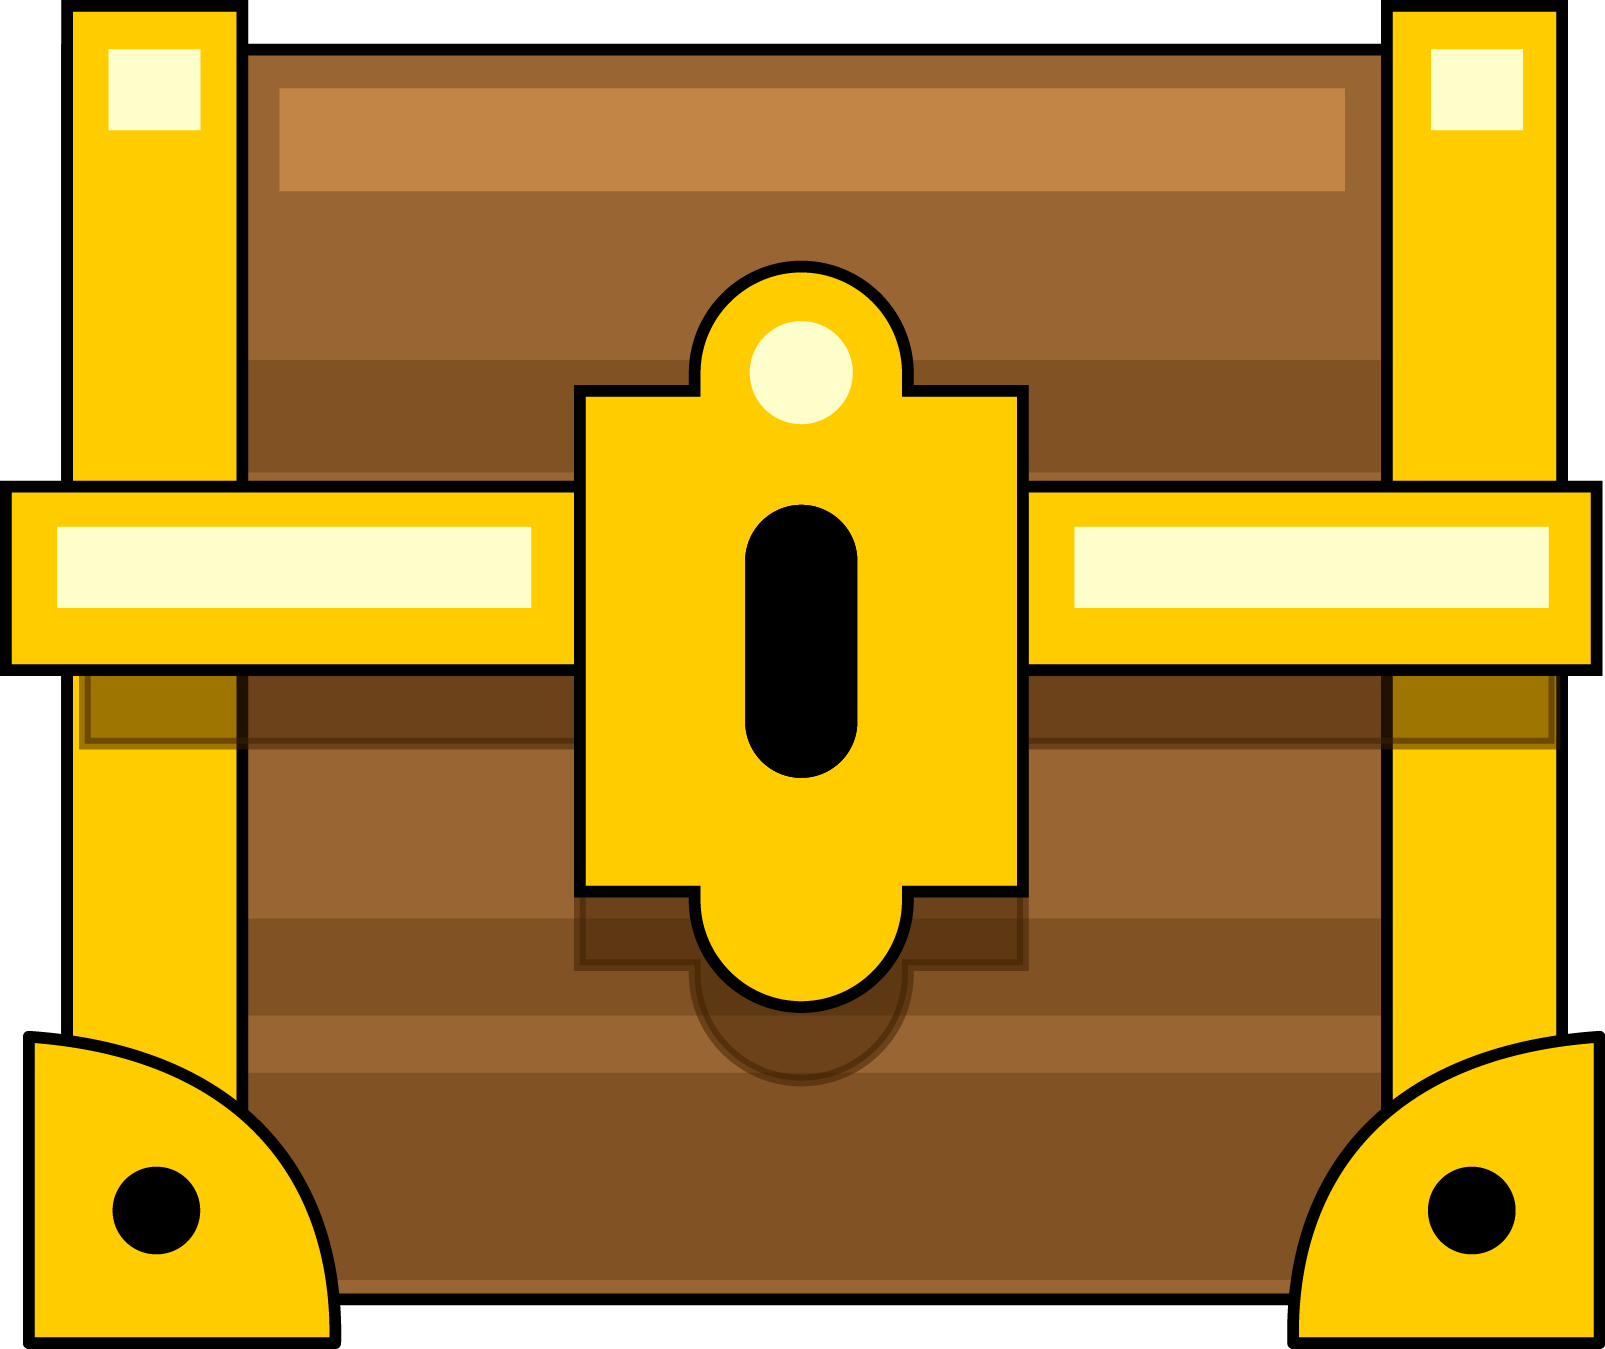 chest clipart front